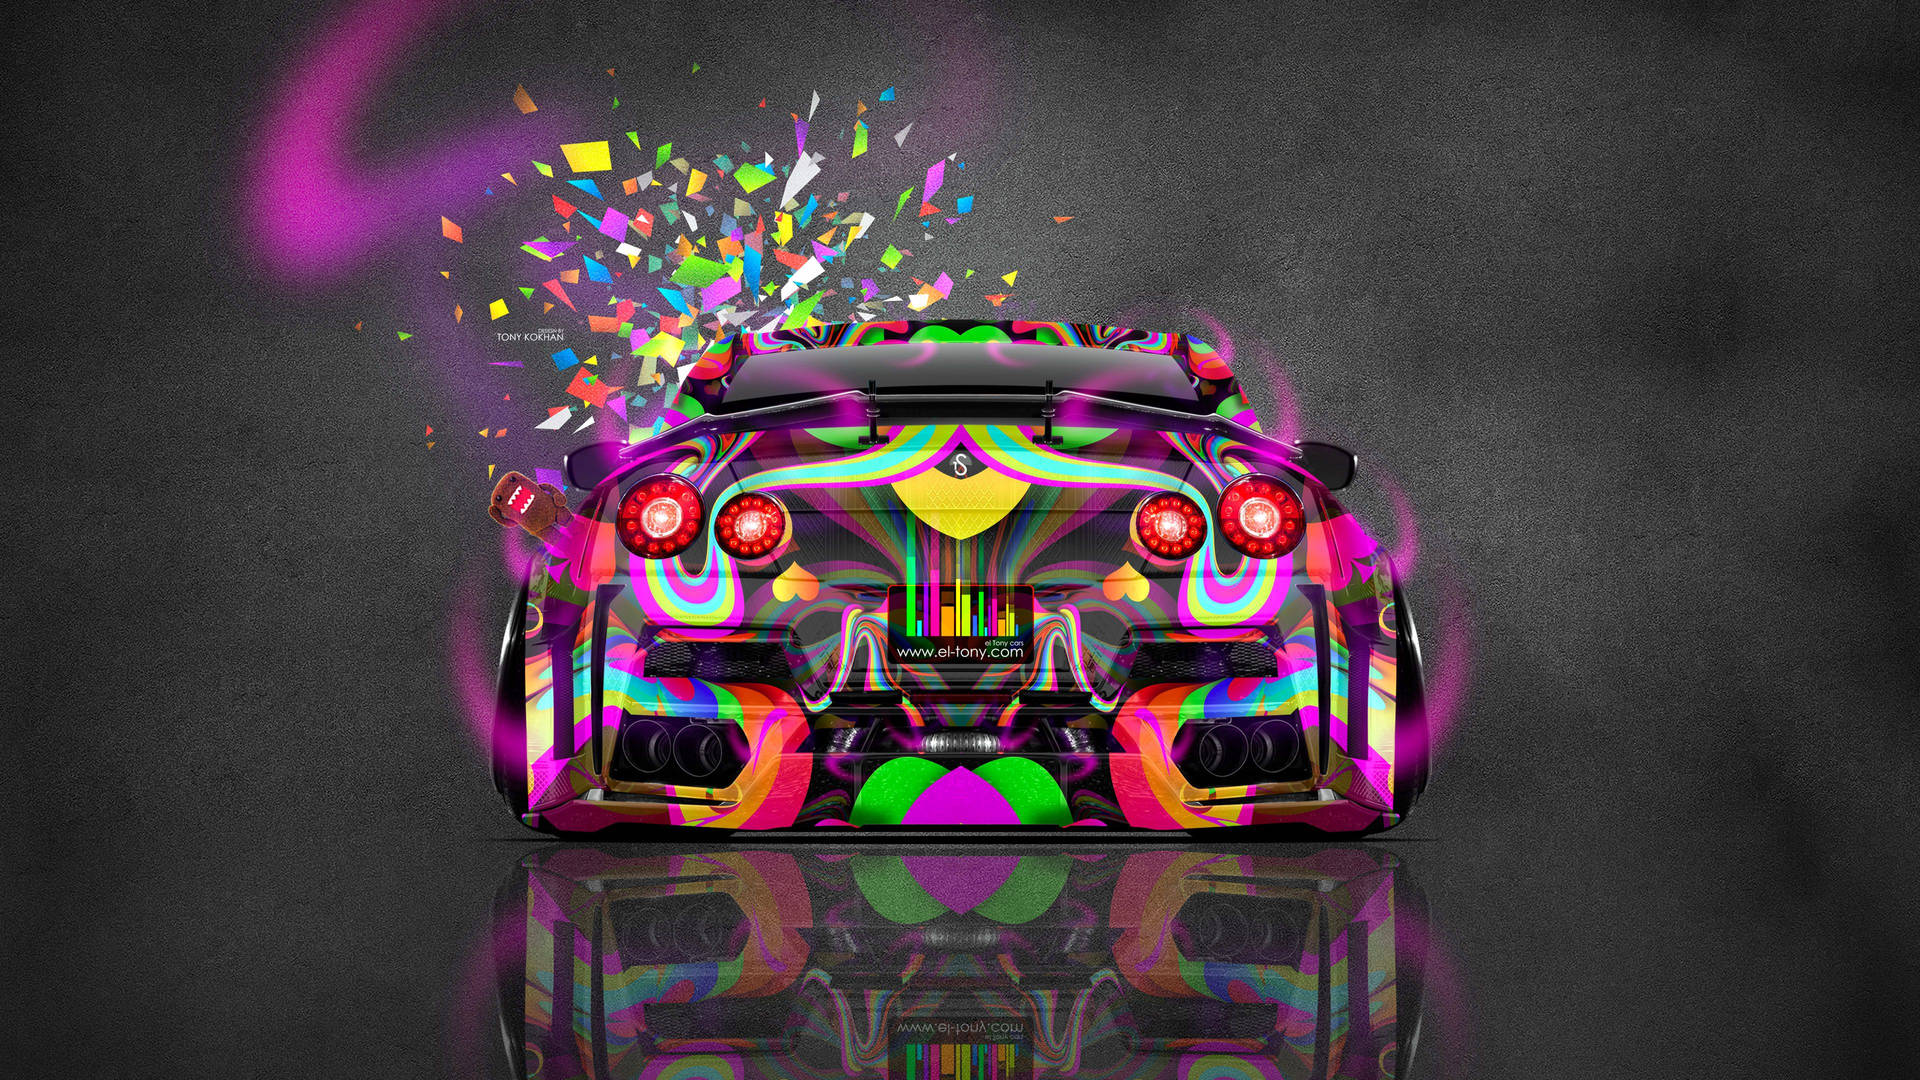 4k Jdm Nissan With Colorful Designs Wallpaper